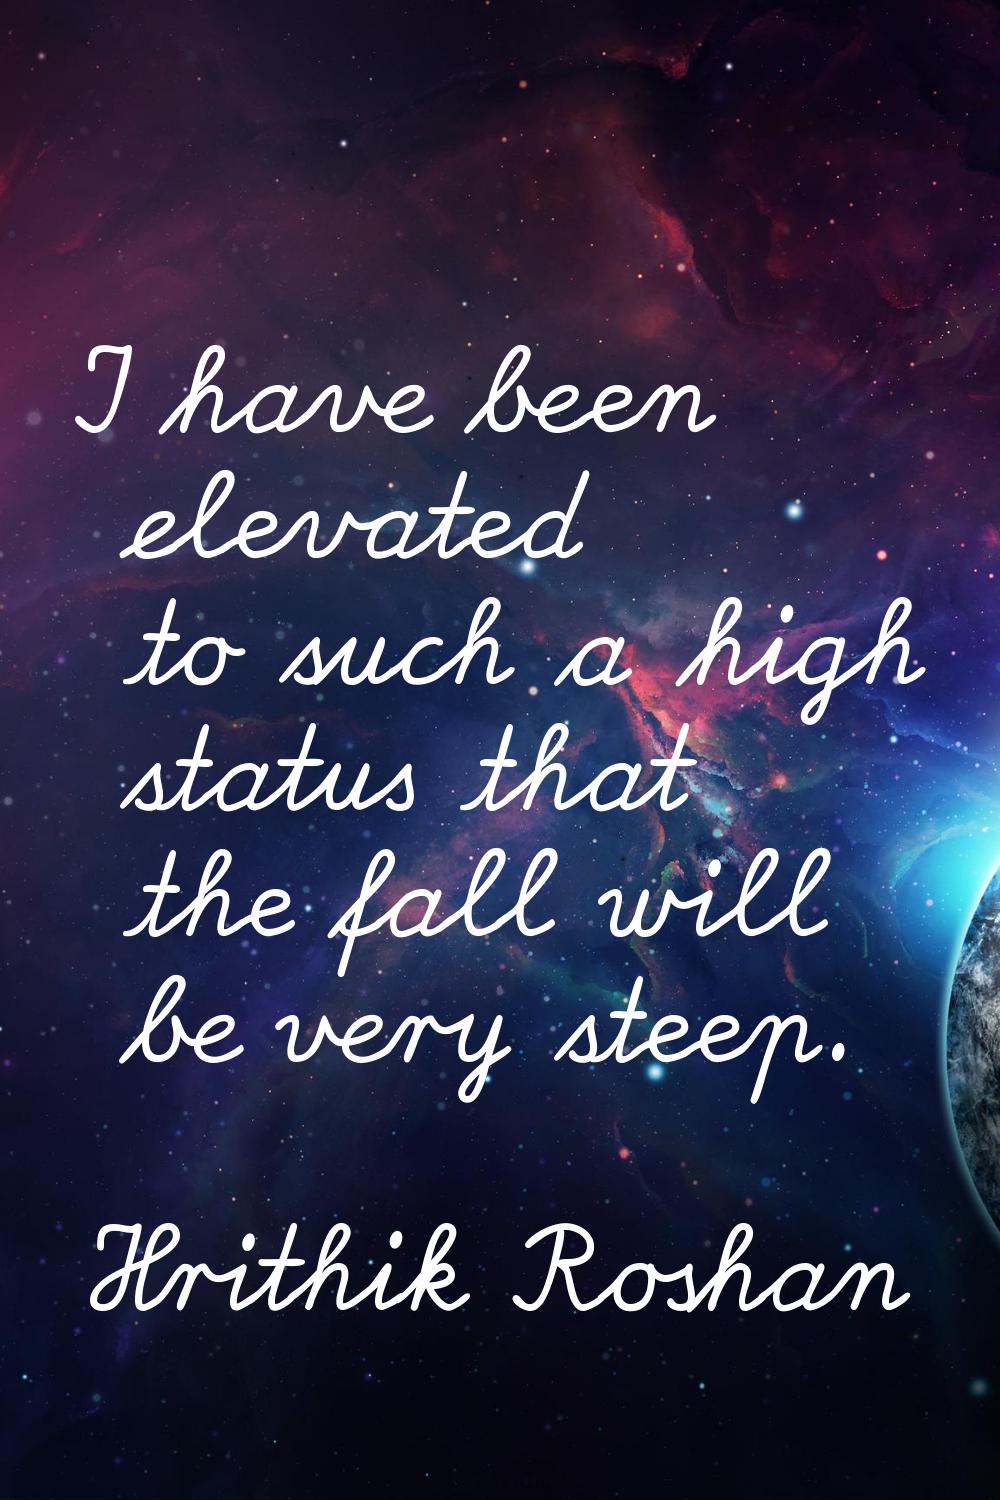 I have been elevated to such a high status that the fall will be very steep.